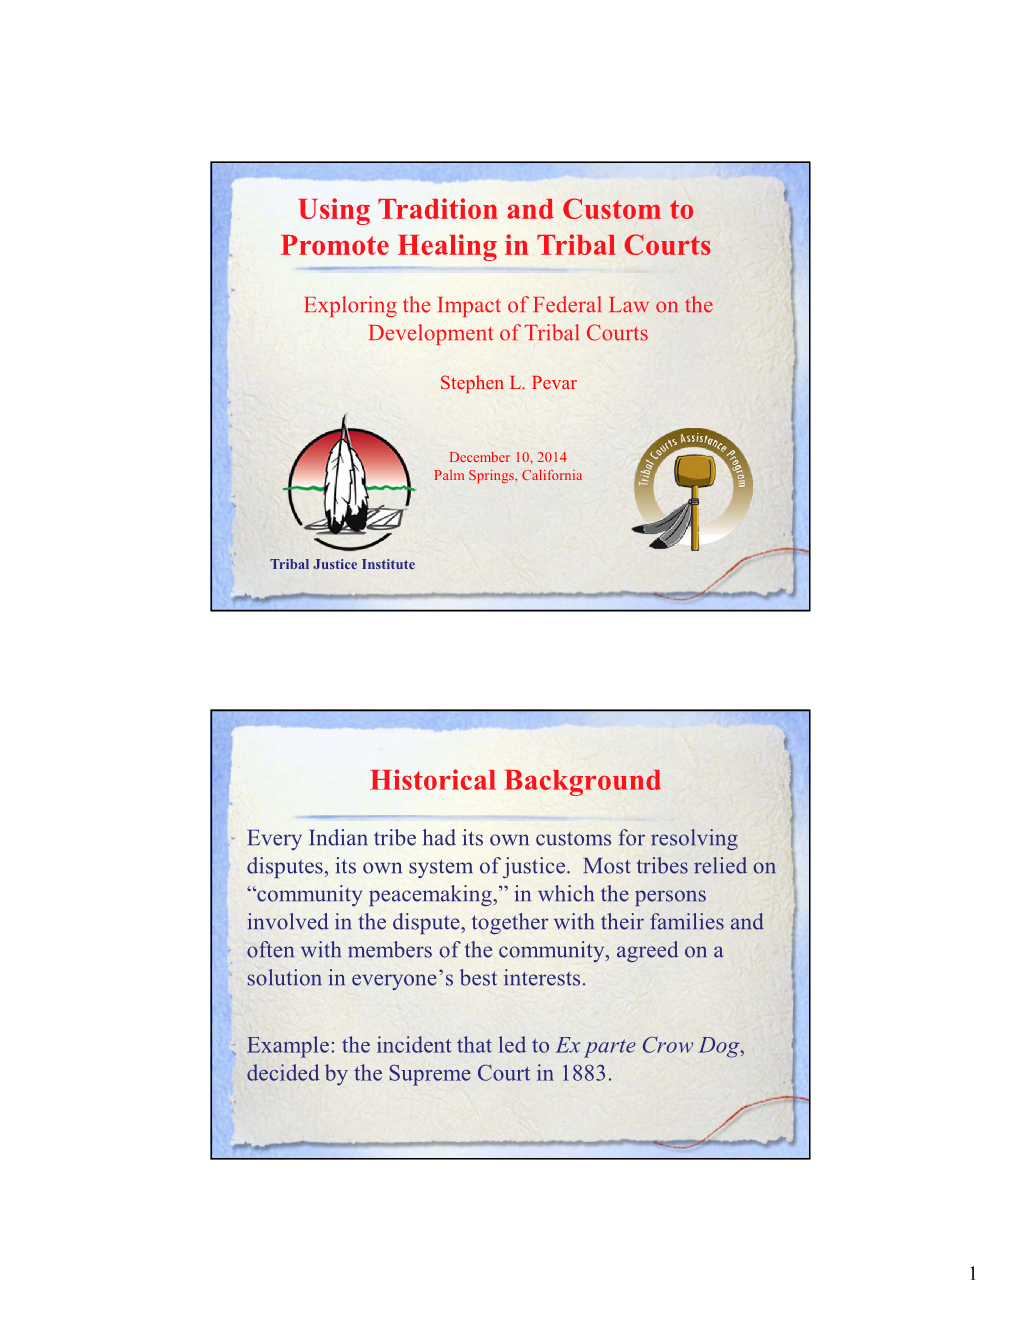 Using Tradition and Custom to Promote Healing in Tribal Courts